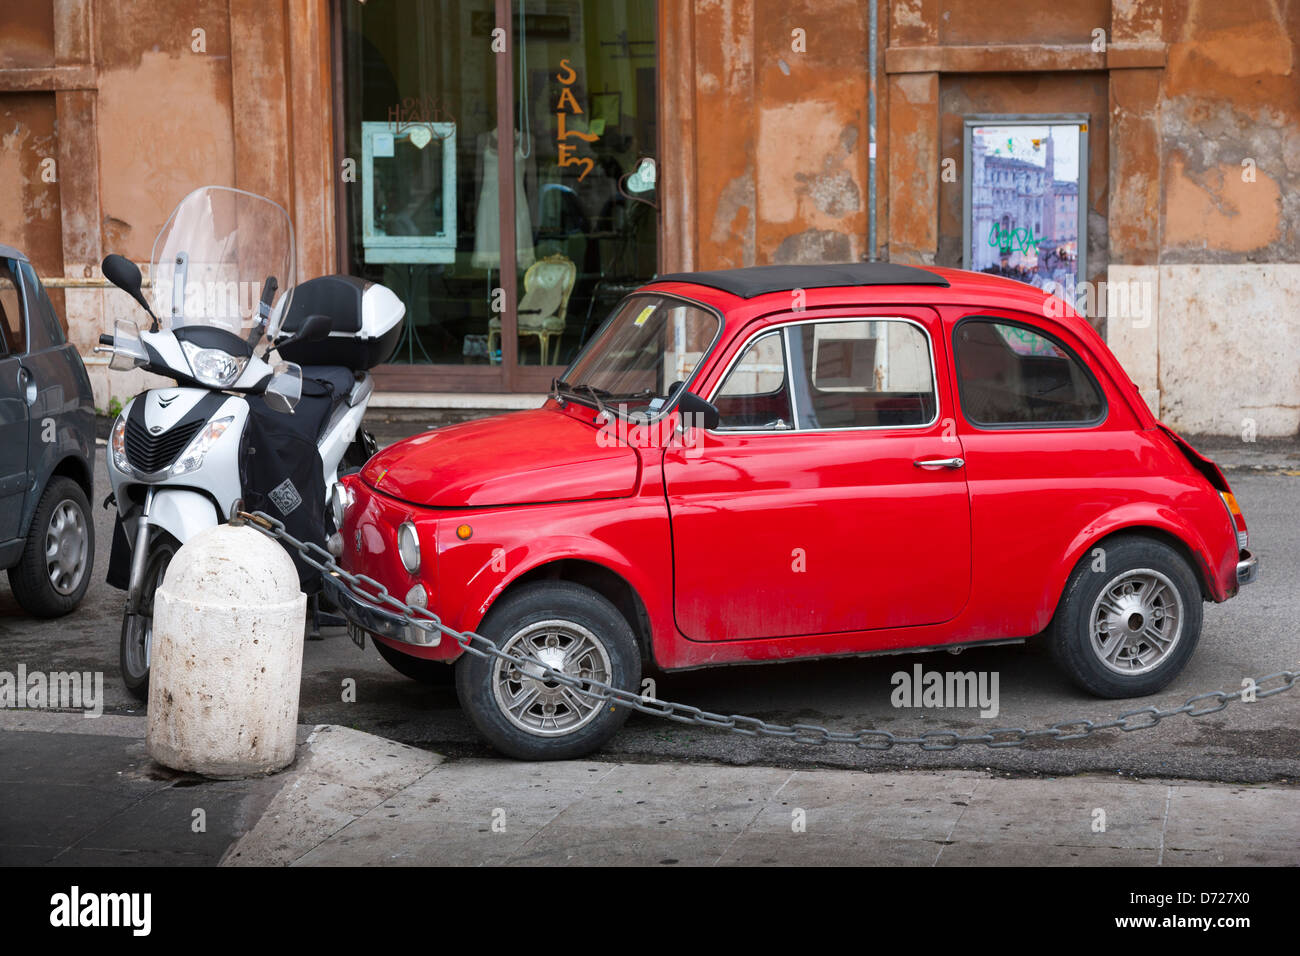 A red Fiat car parked in the street in Rome, Italy Stock Photo